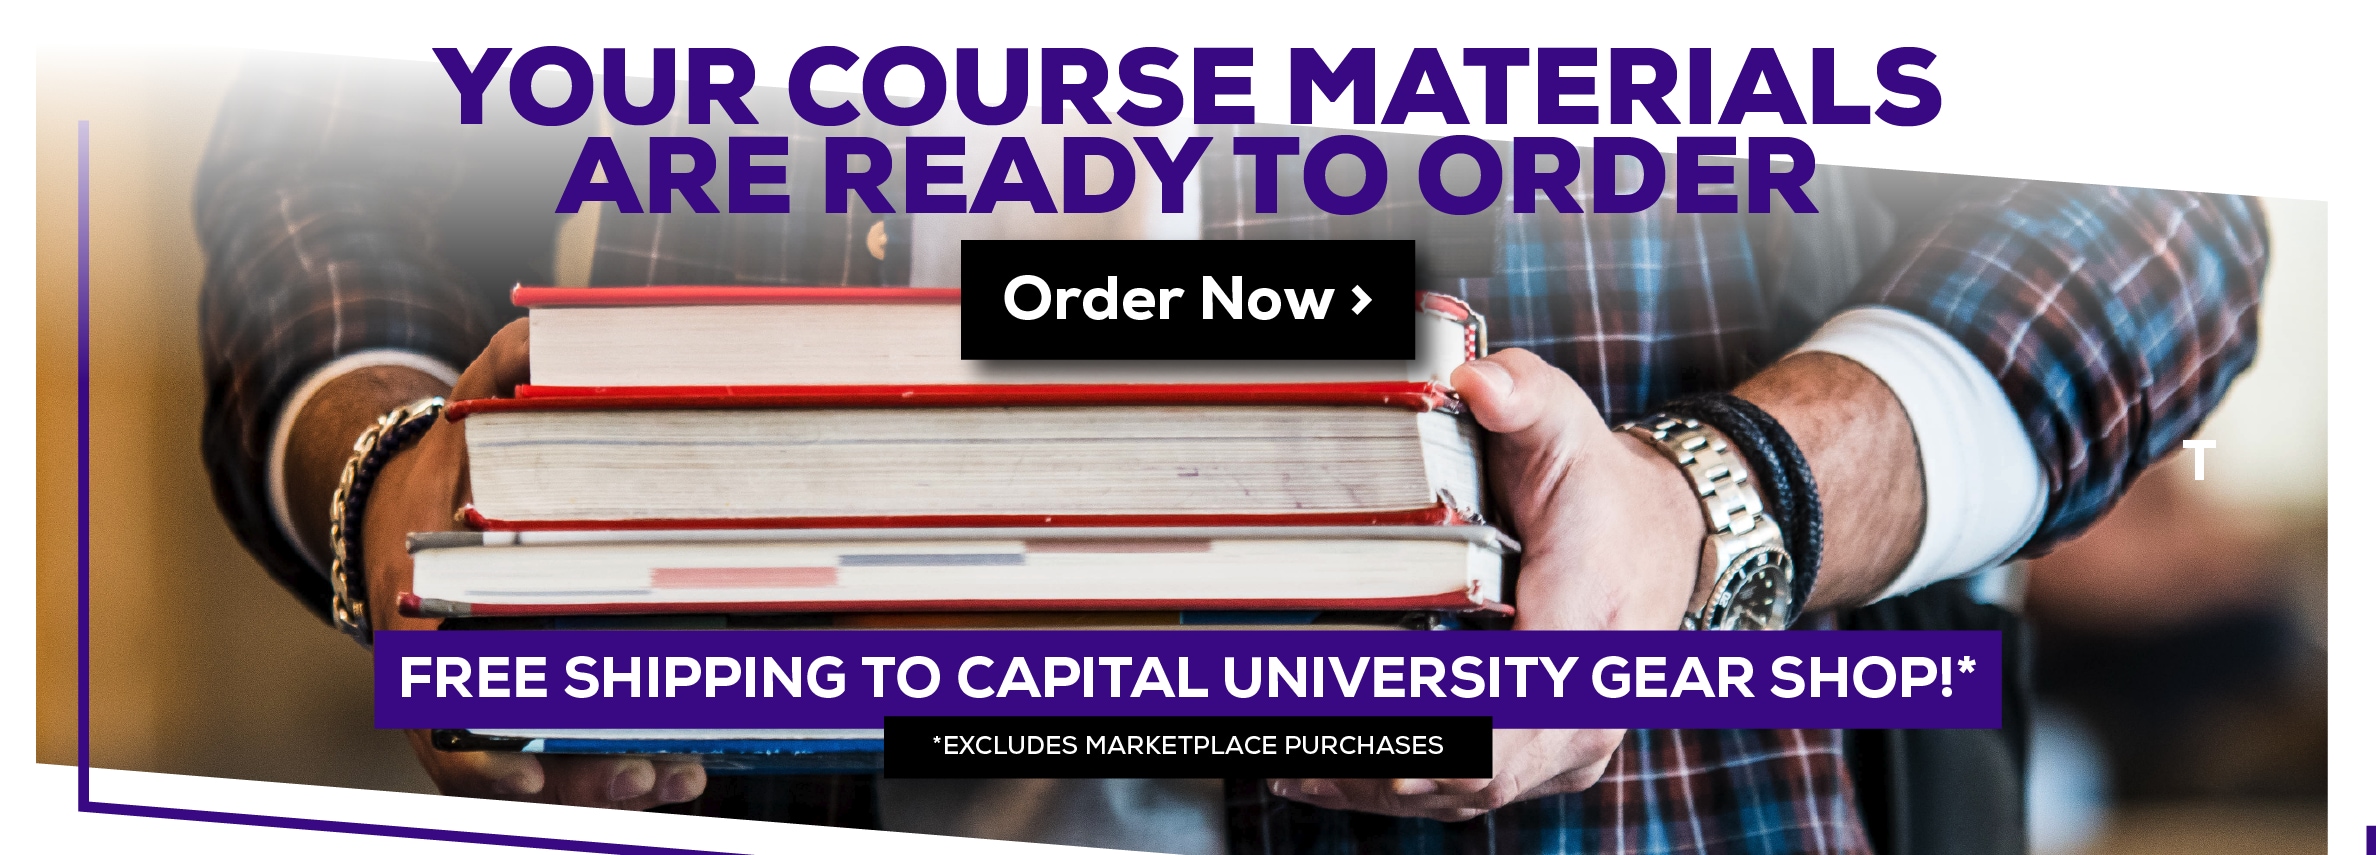 Your Course Materials are Ready to Order. Order Now. Free shipping on orders to Capital University Gear Shop *Excludes marketplace purchases.